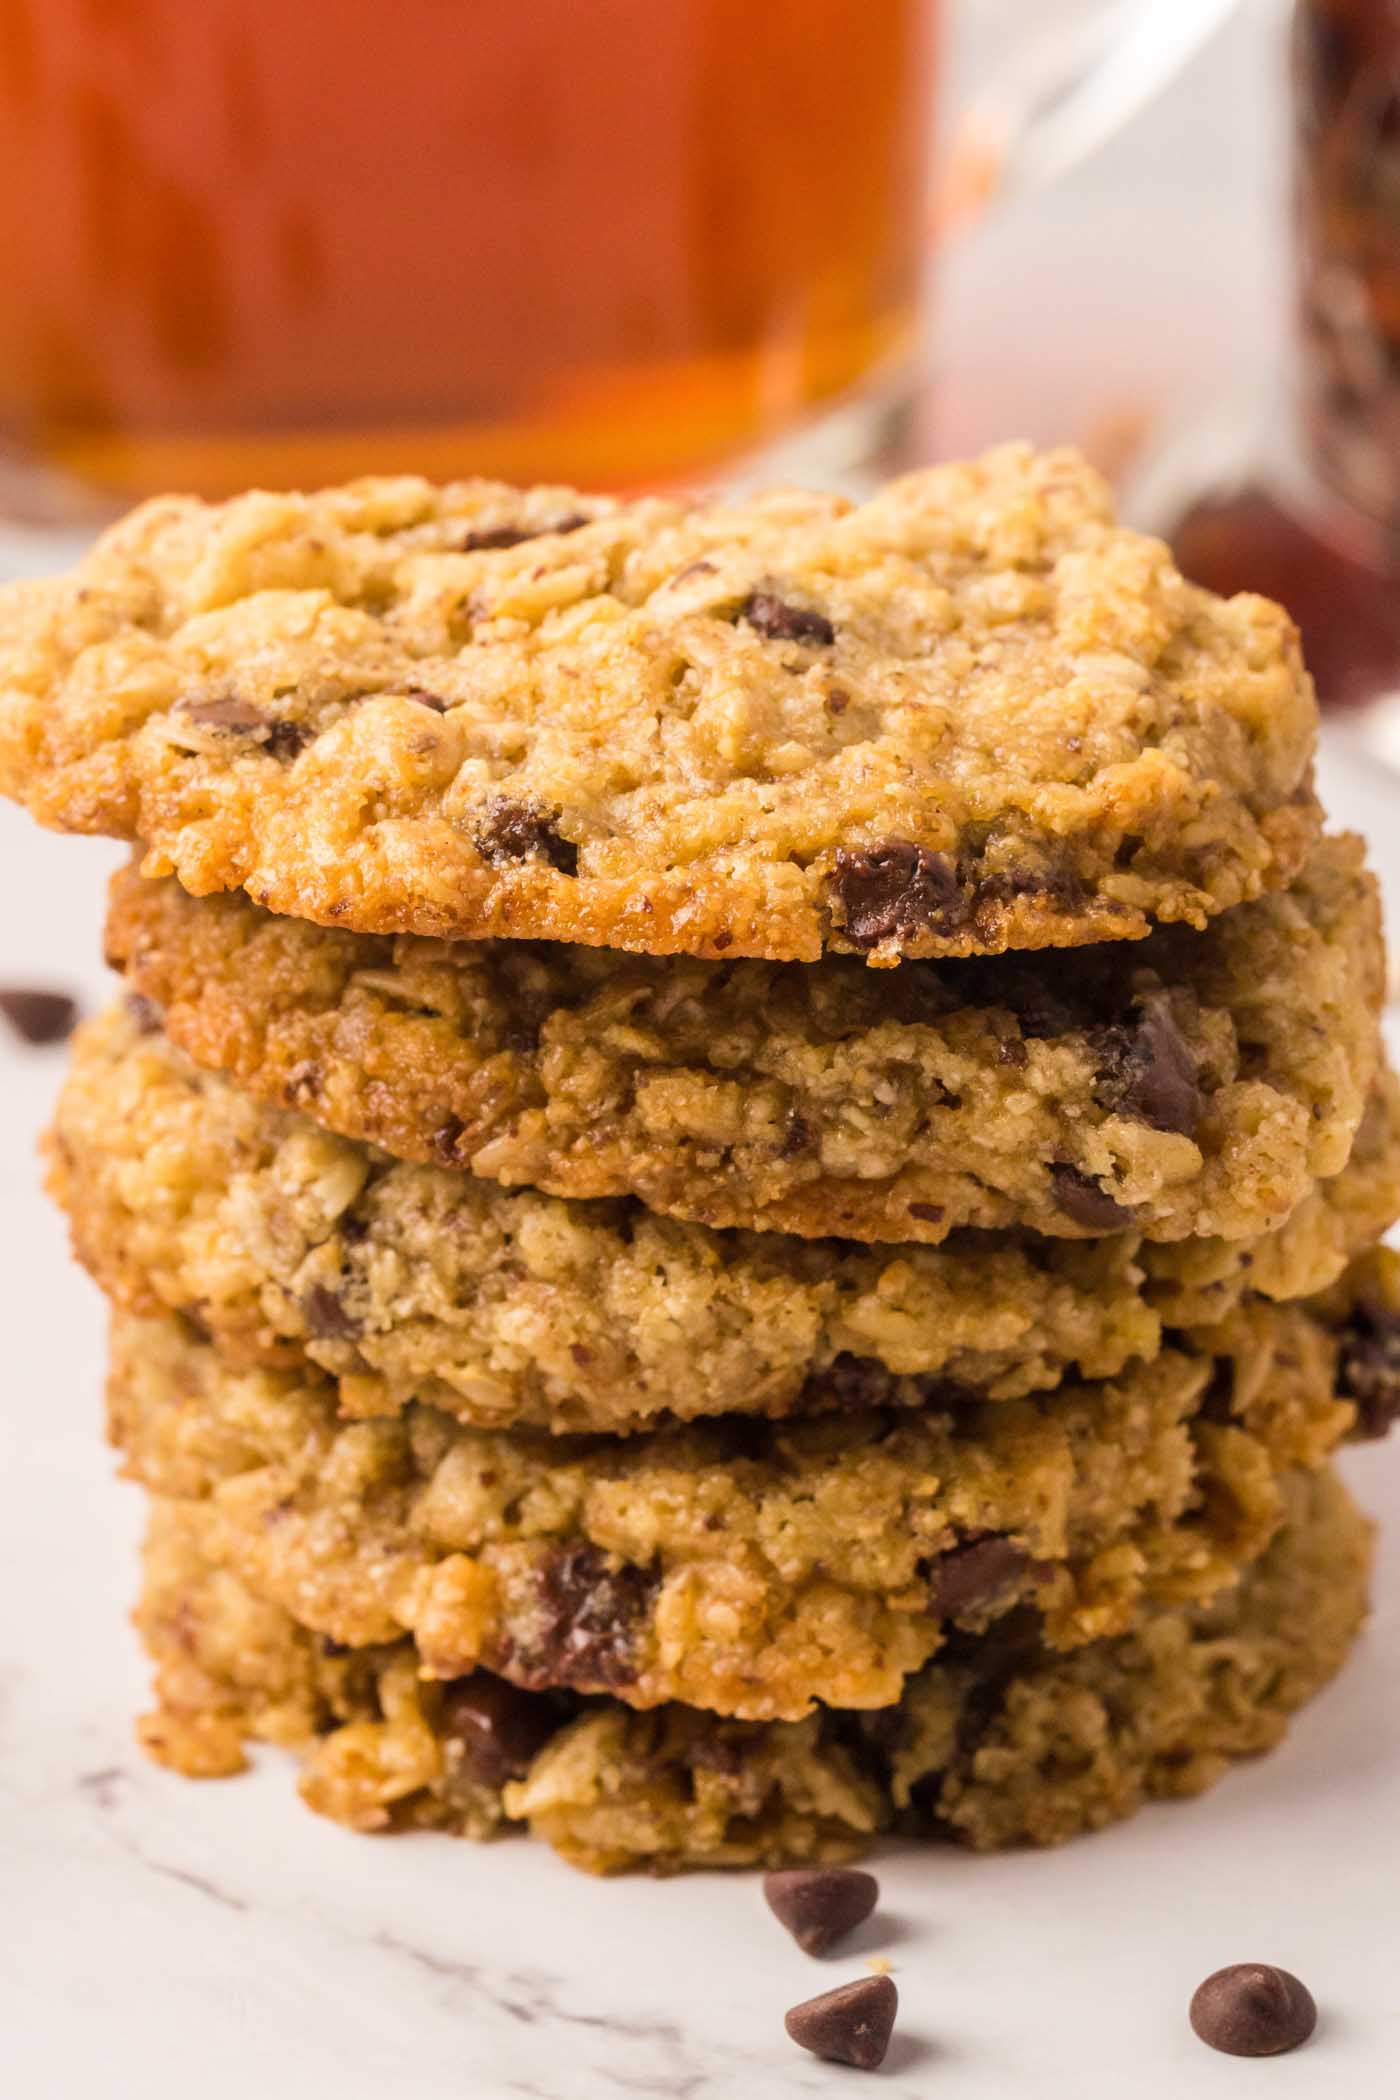 A stack of 5 oatmeal chocolate chips cookies.